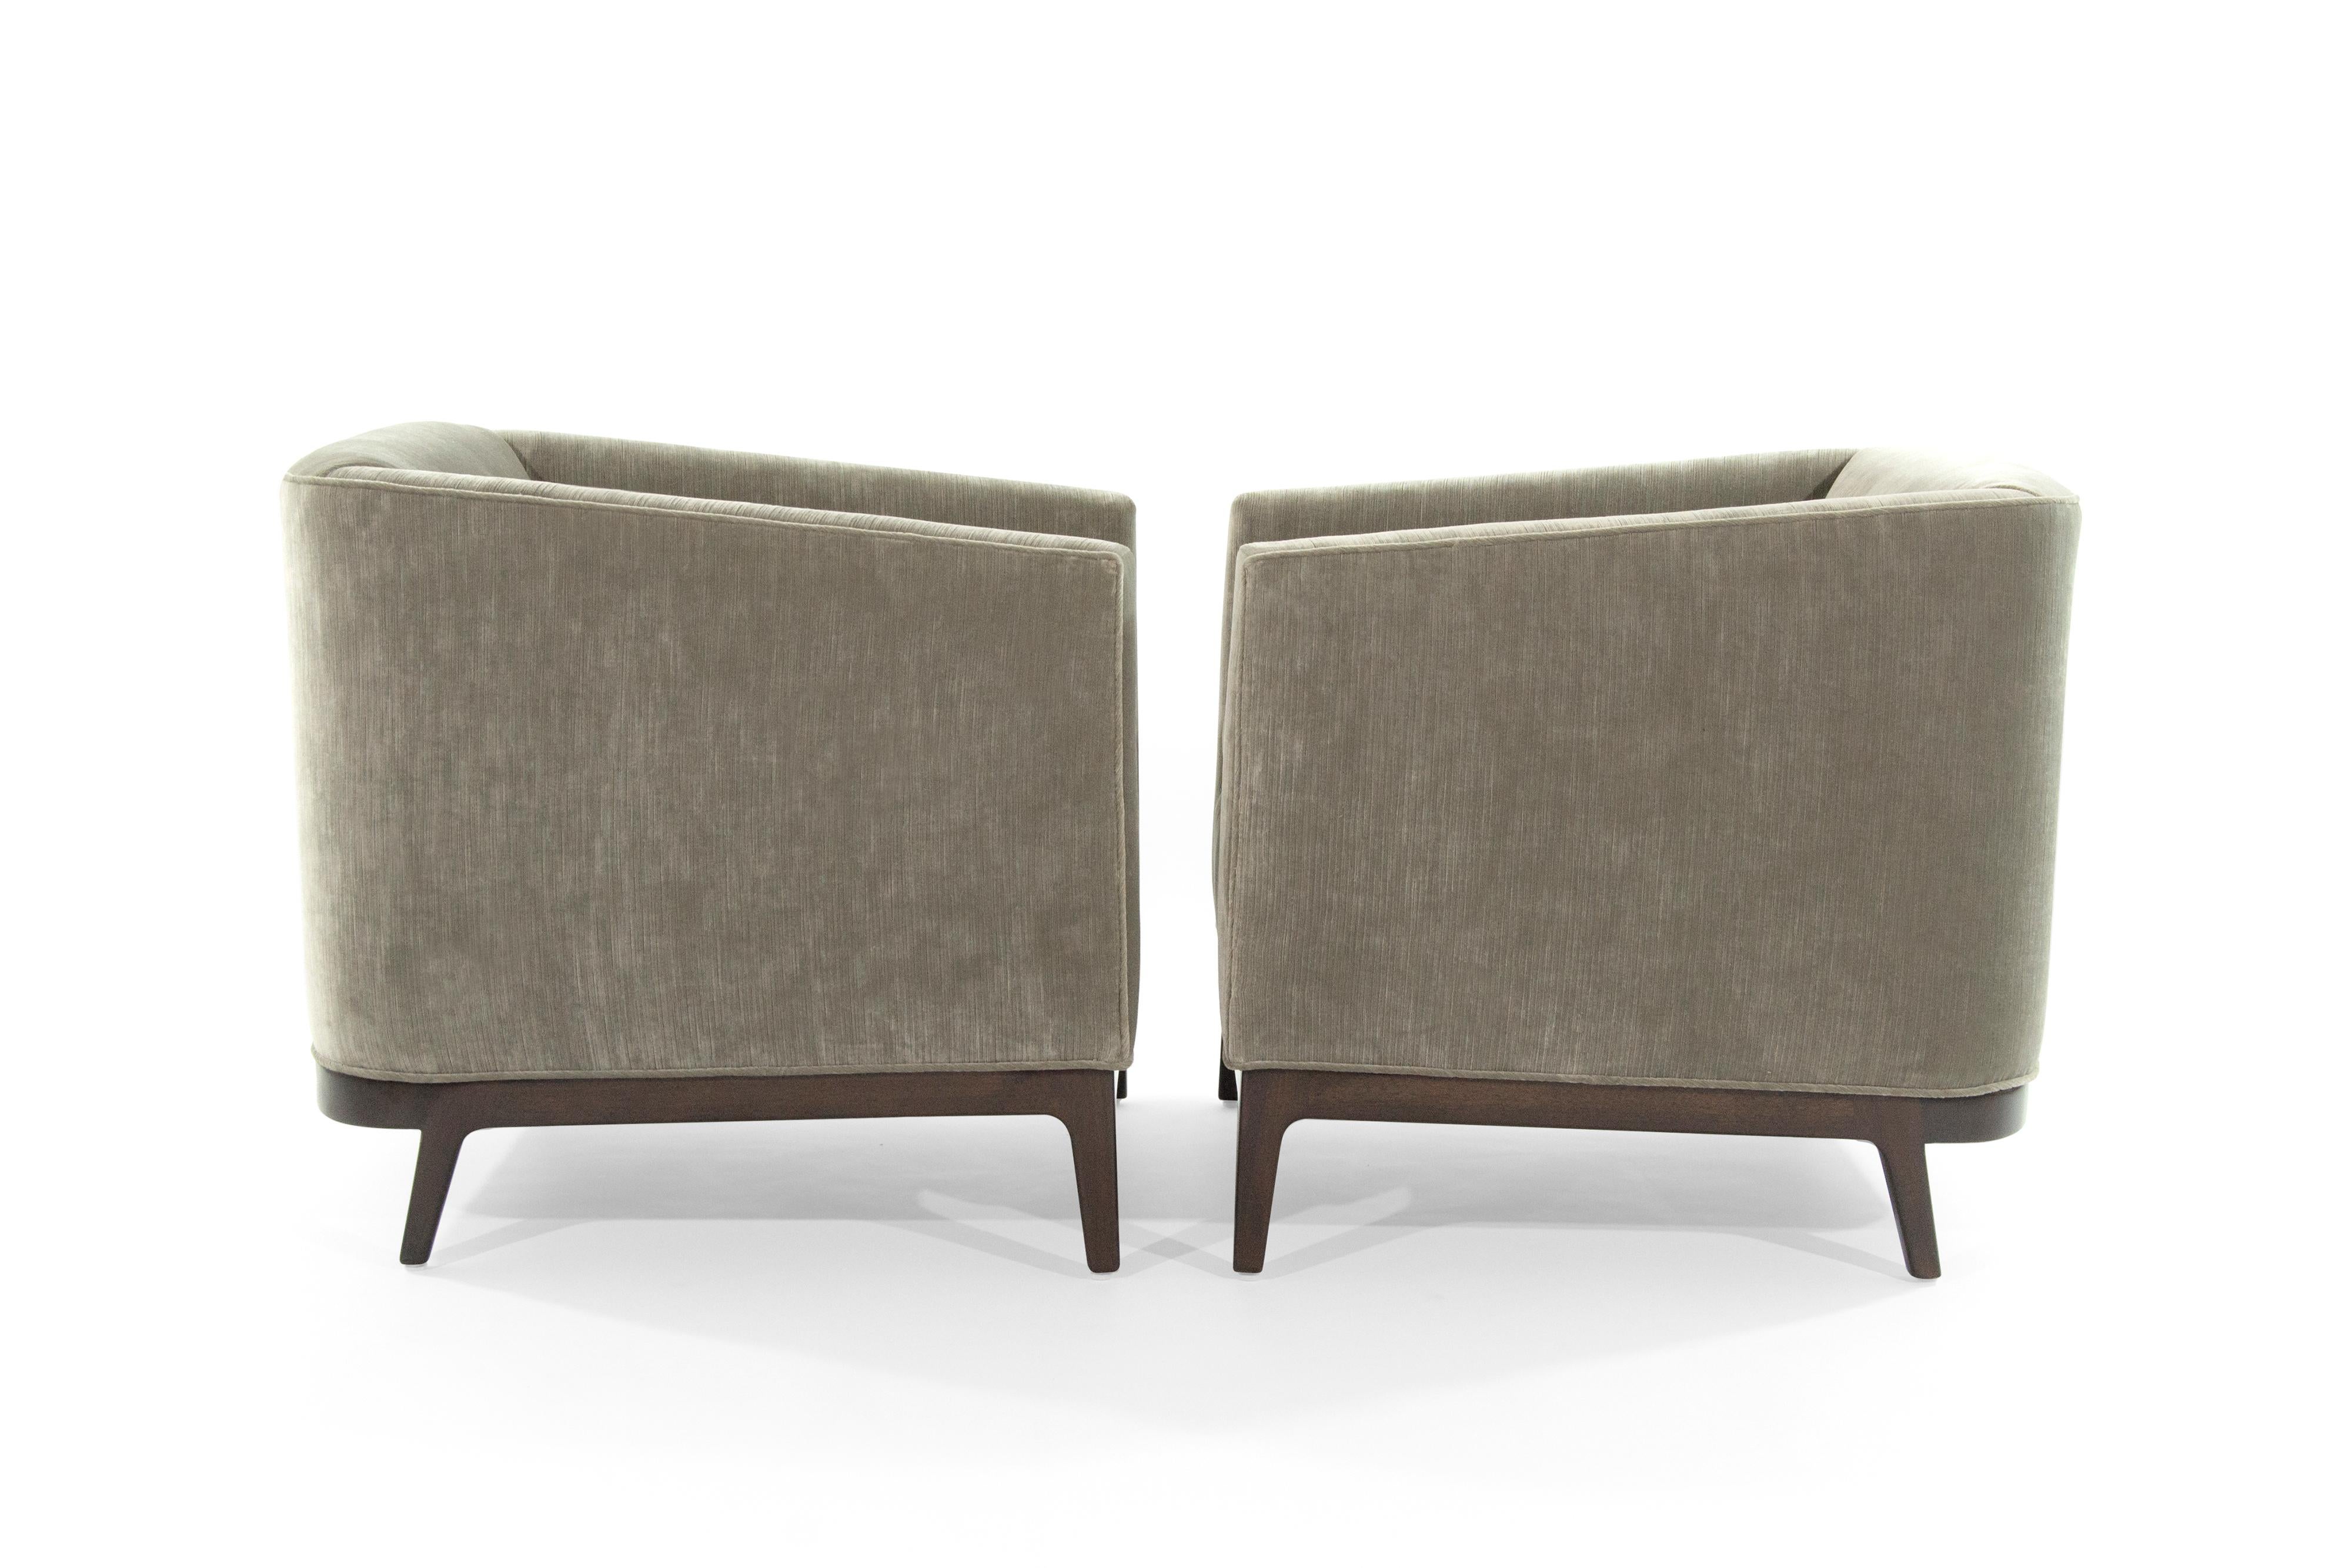 American Mid-Century Modern Tub Chairs in Chenille